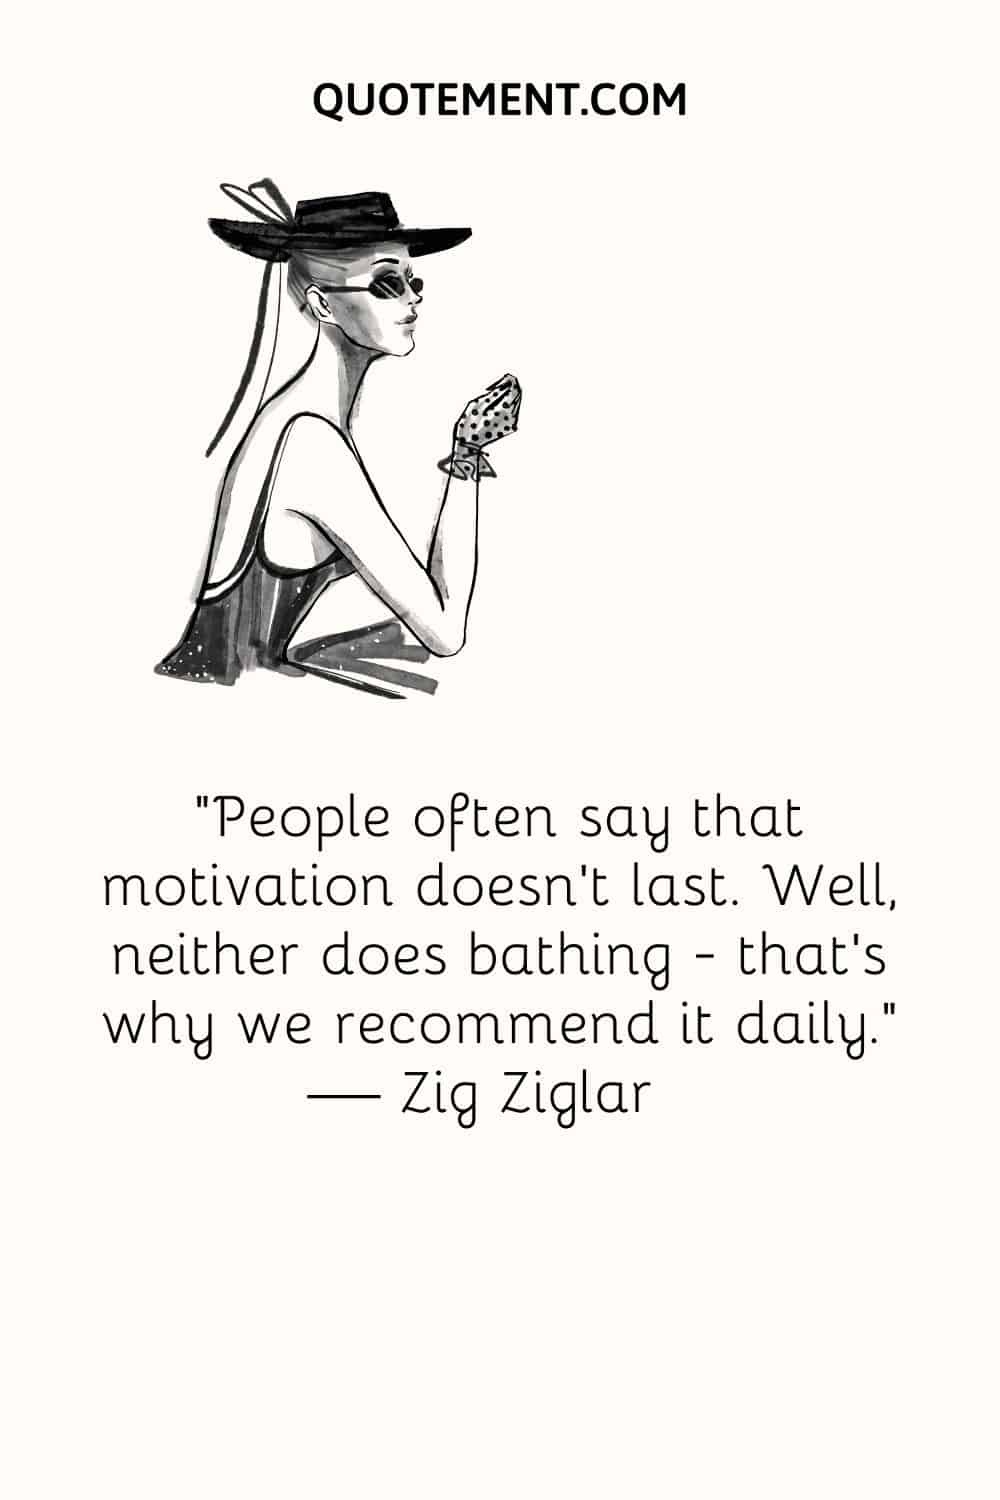 “People often say that motivation doesn’t last. Well, neither does bathing — that’s why we recommend it daily.” — Zig Ziglar